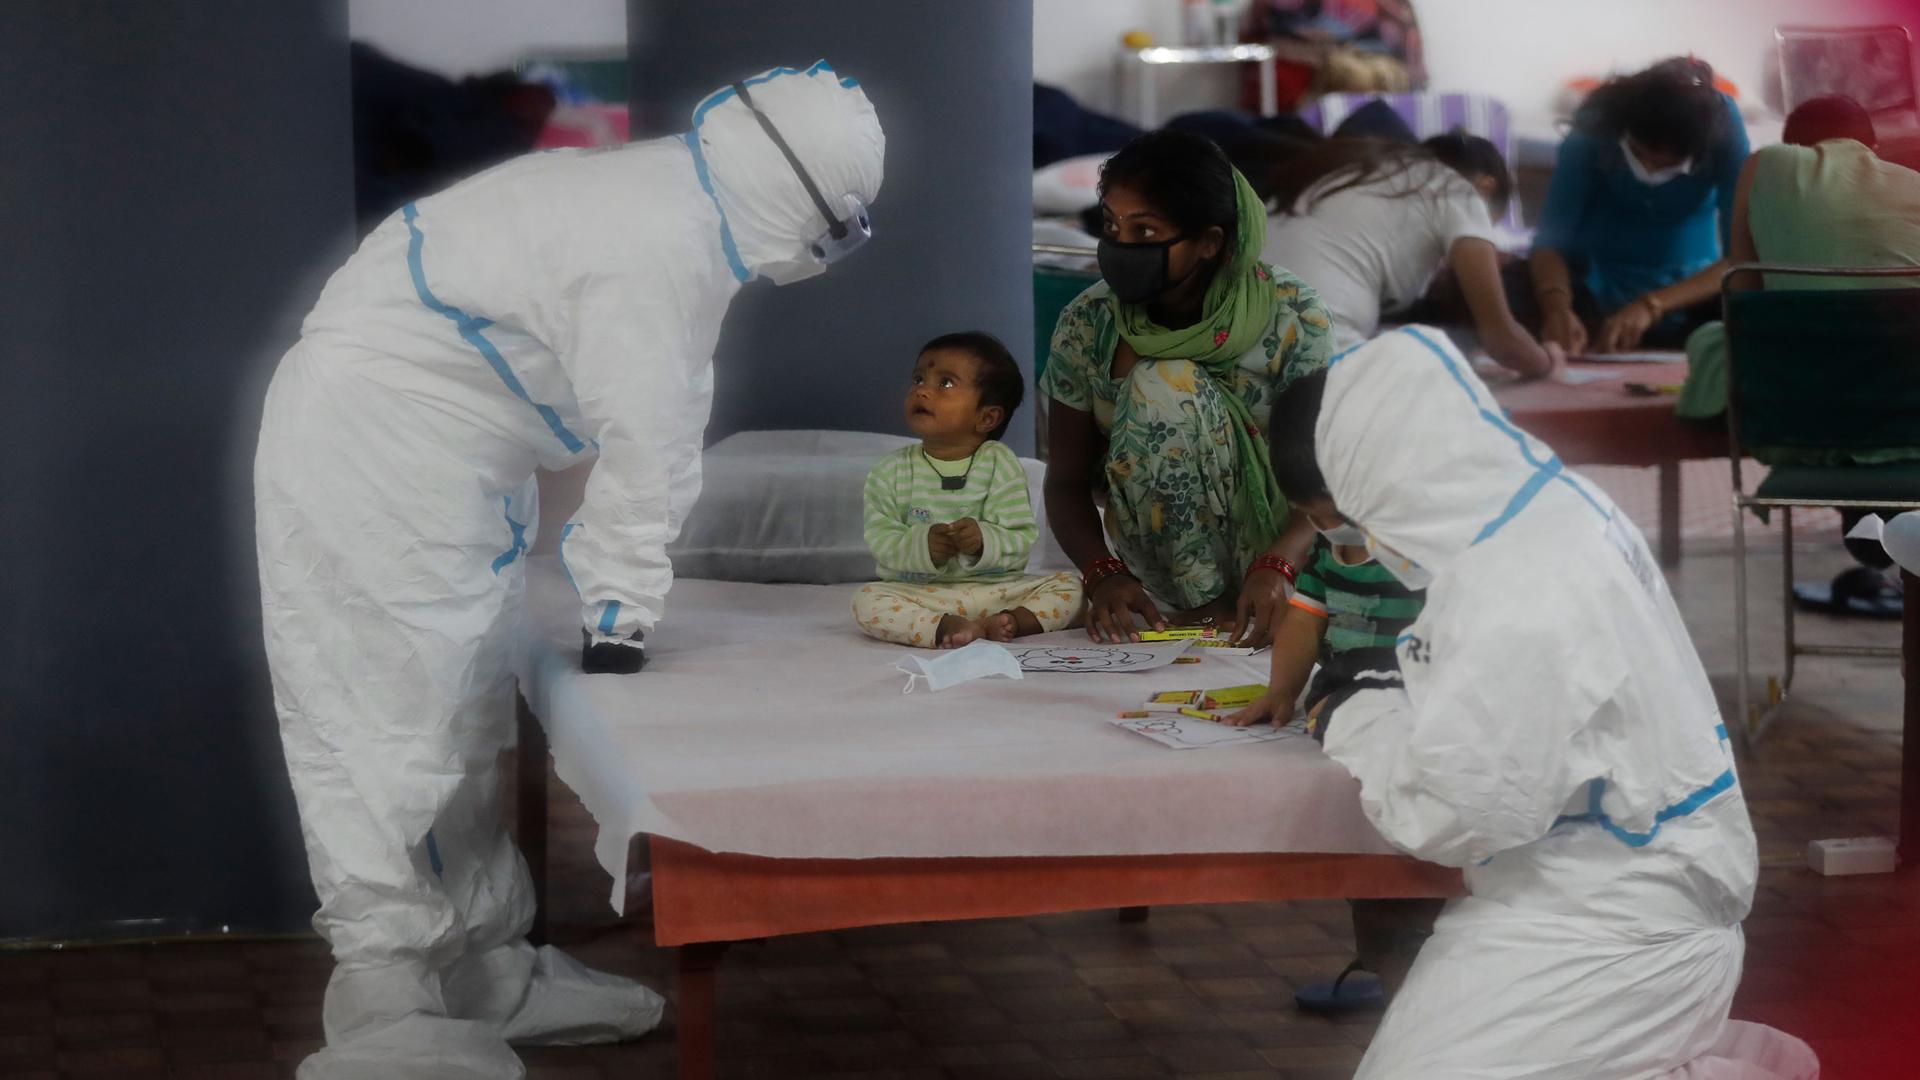 A young child is shown sitting on a bed with health care workers nearby dressed in full protective suits.